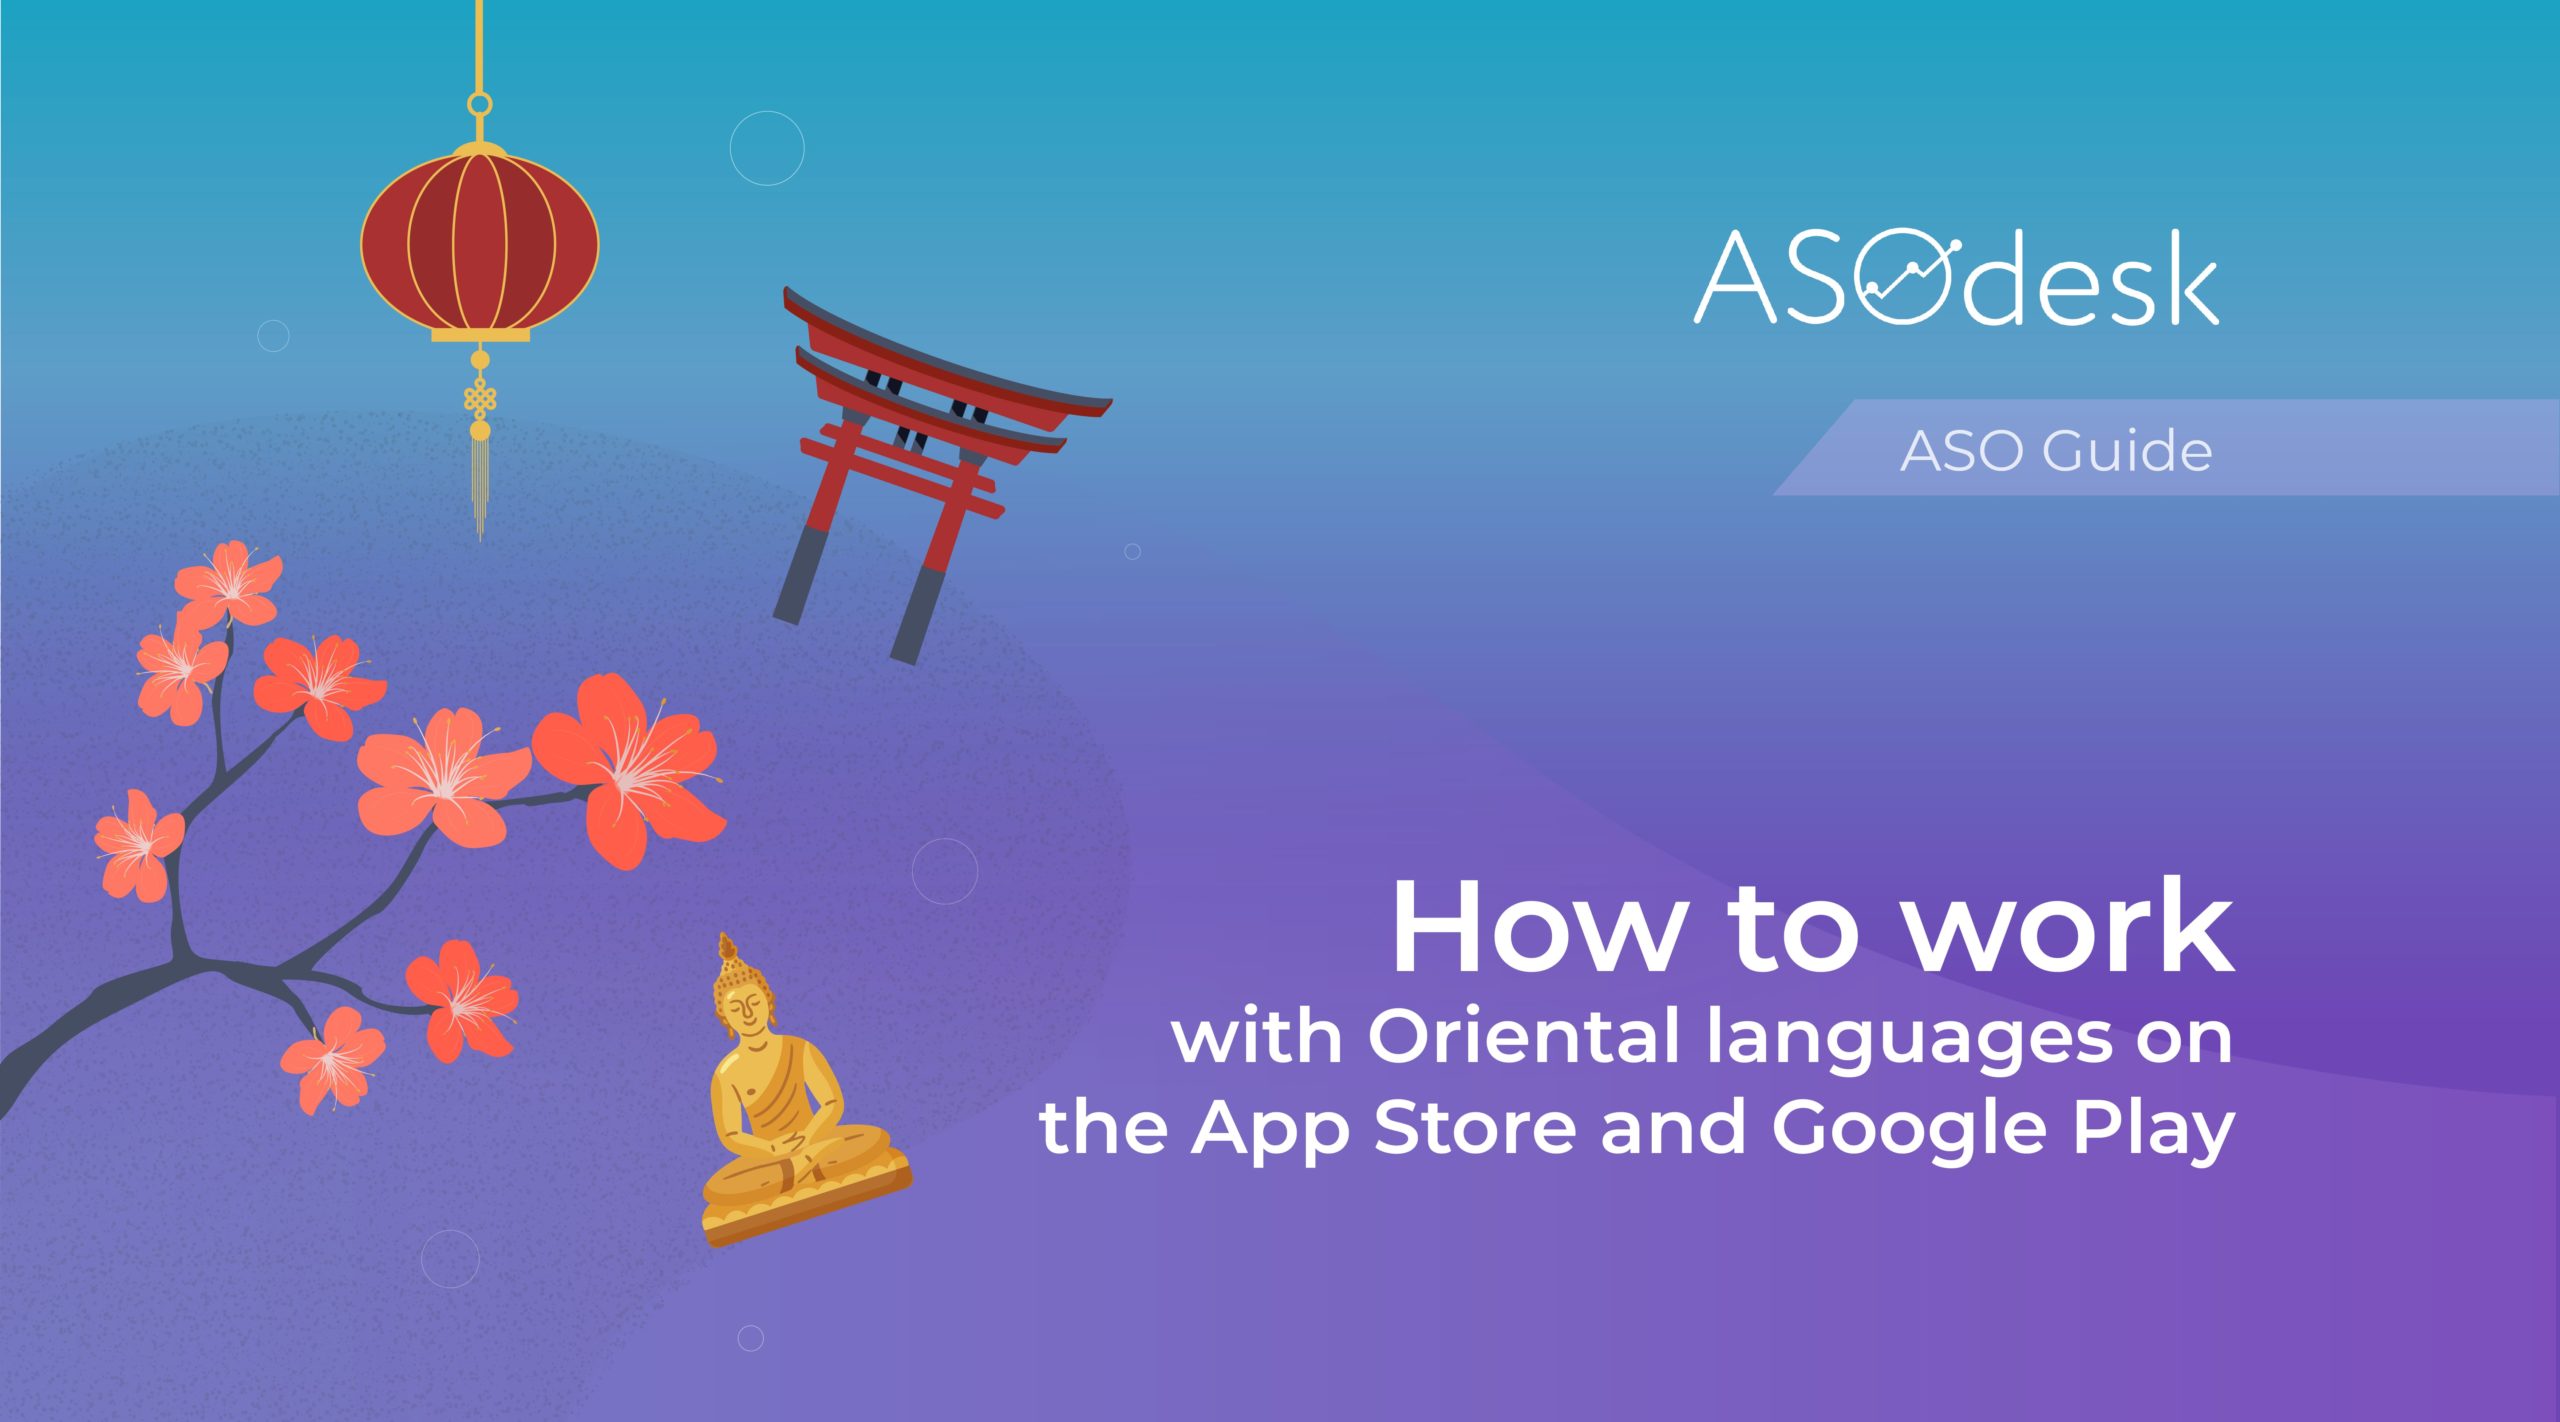 how-to-work-with-oriental-languages-on-the-app-store-and-google-play-asodesk-blog